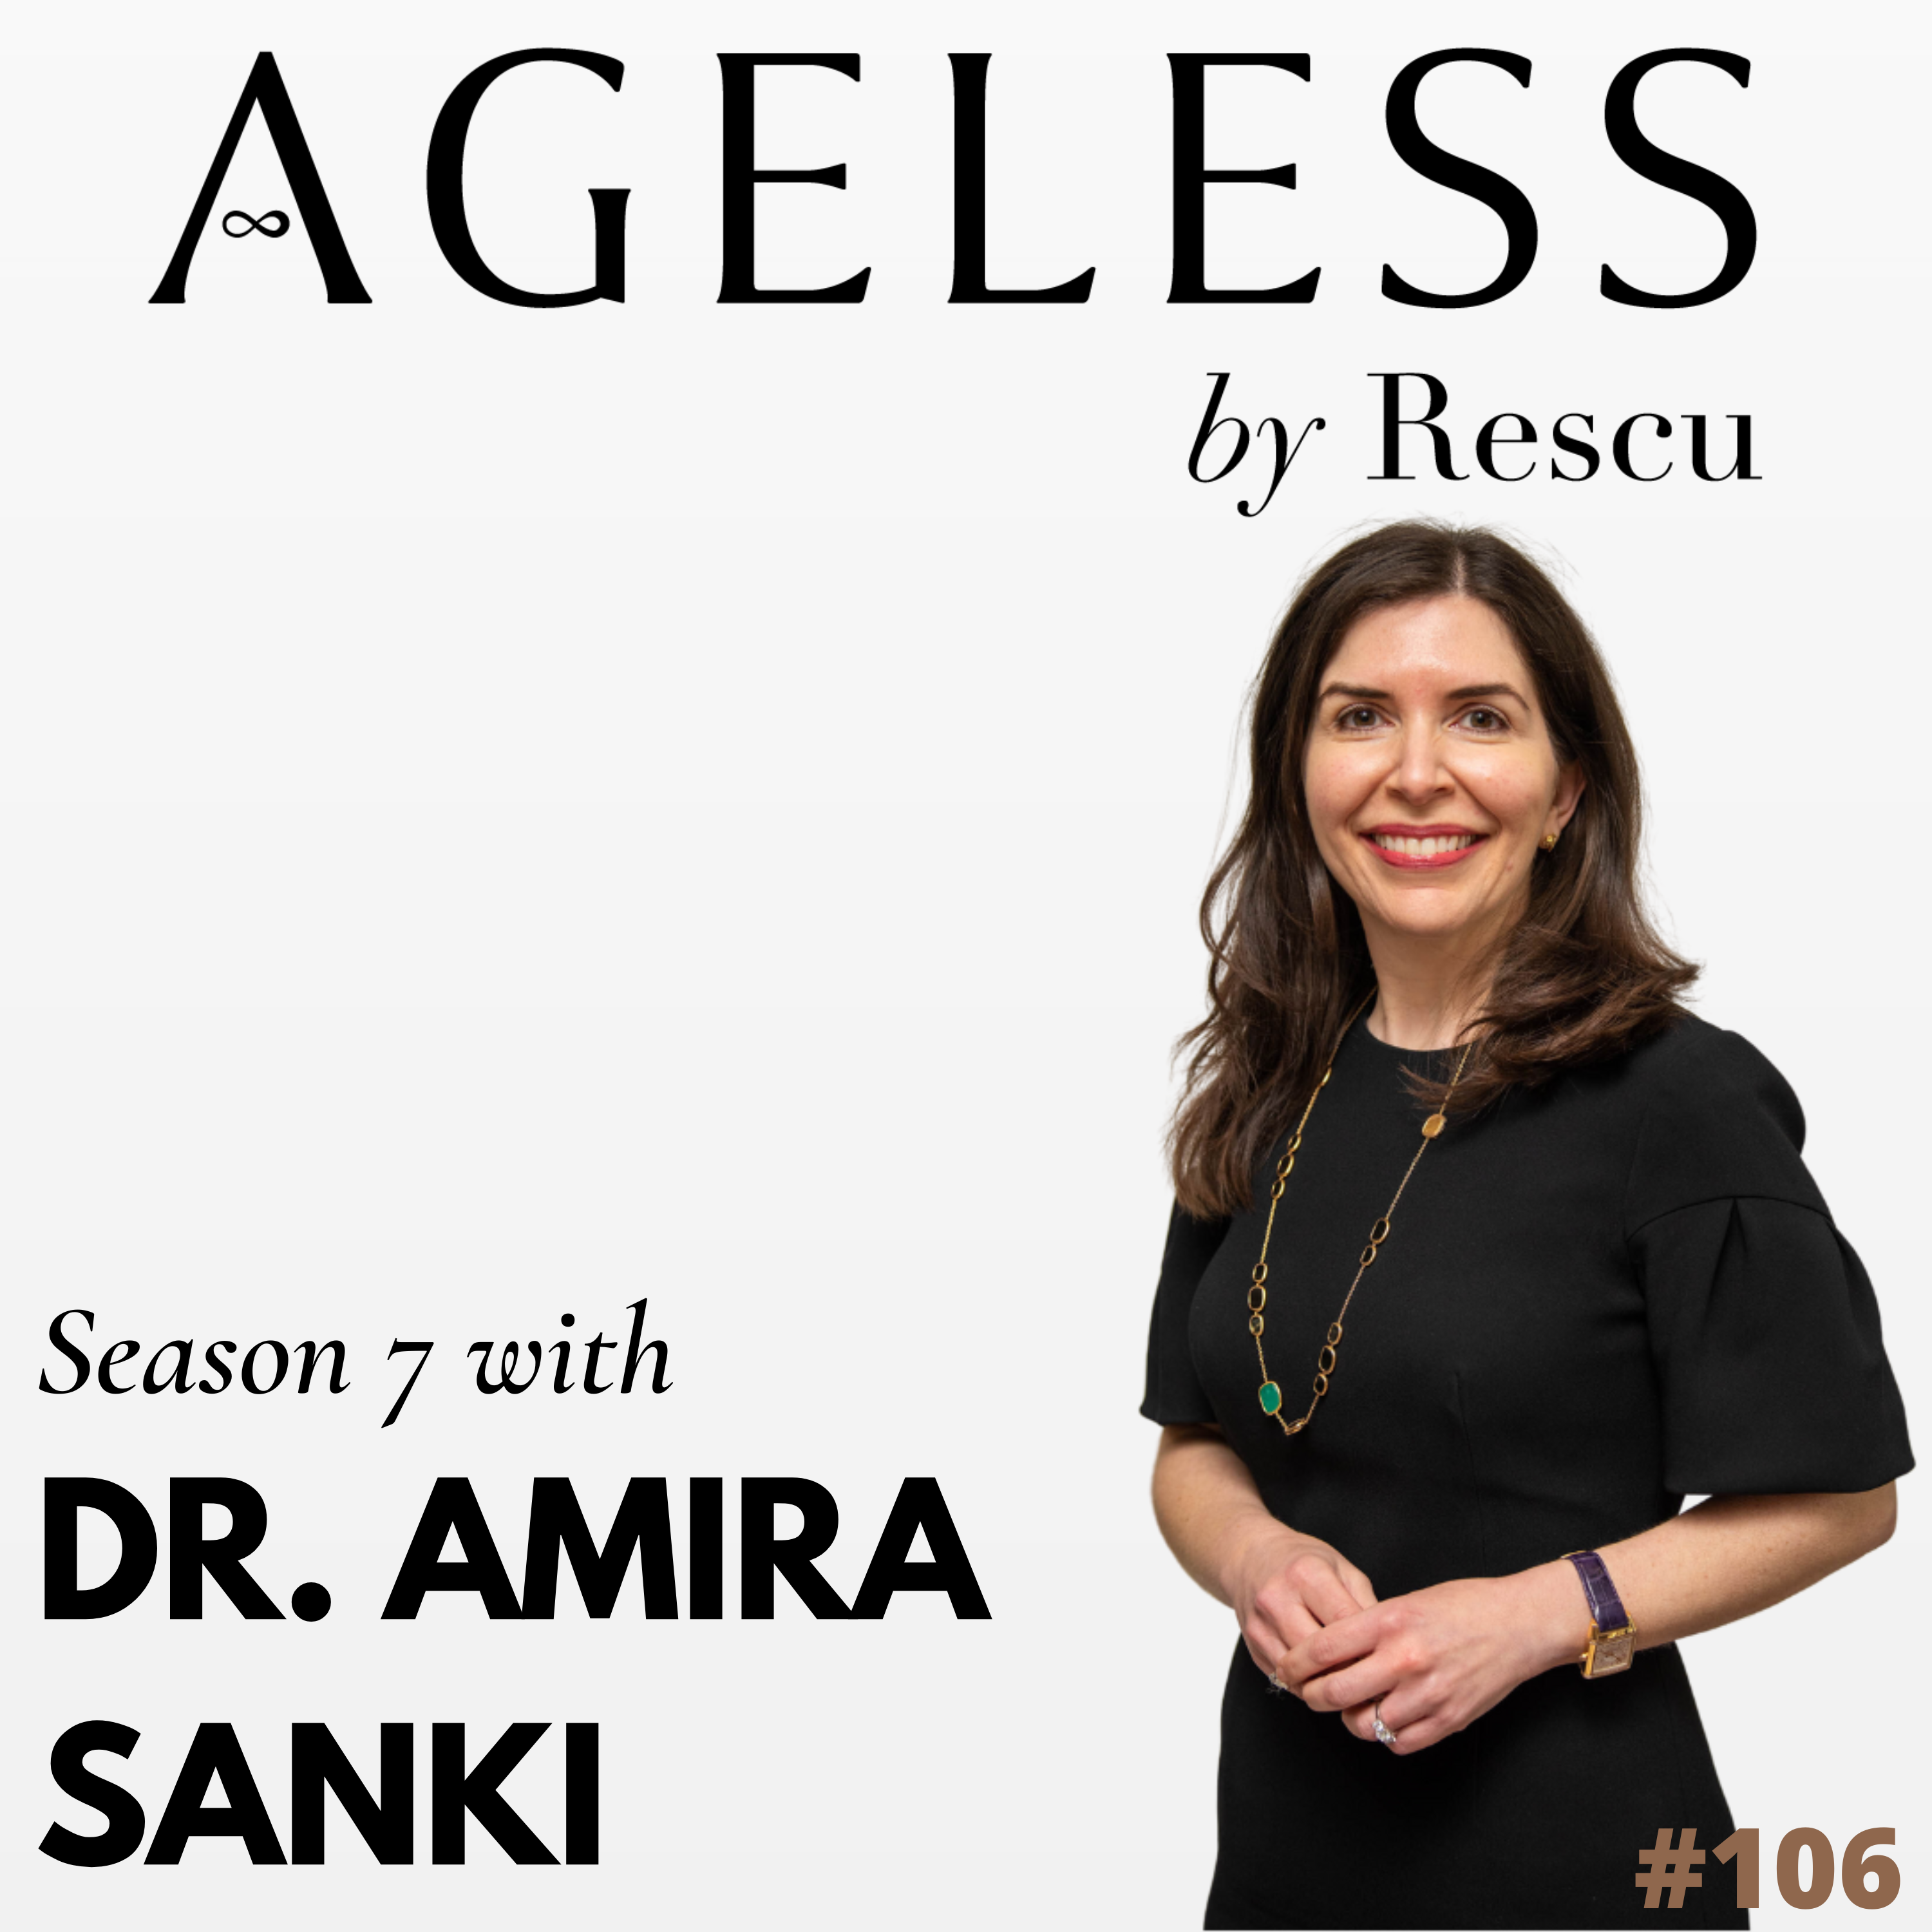 Dr. Amira Sanki BSc(med) MBBS PhD FRACS(plast) | Specialist Plastic Surgeon | A New Era for Patient Safety